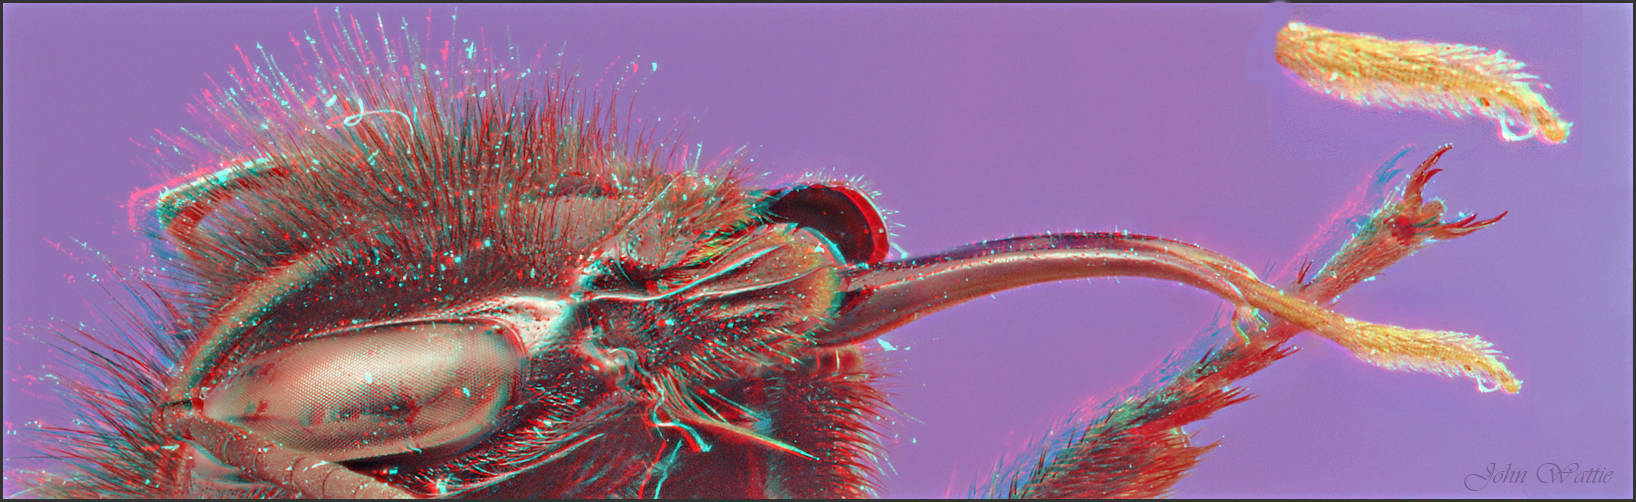 Macro anaglyph of bumble bee tongue in 3D